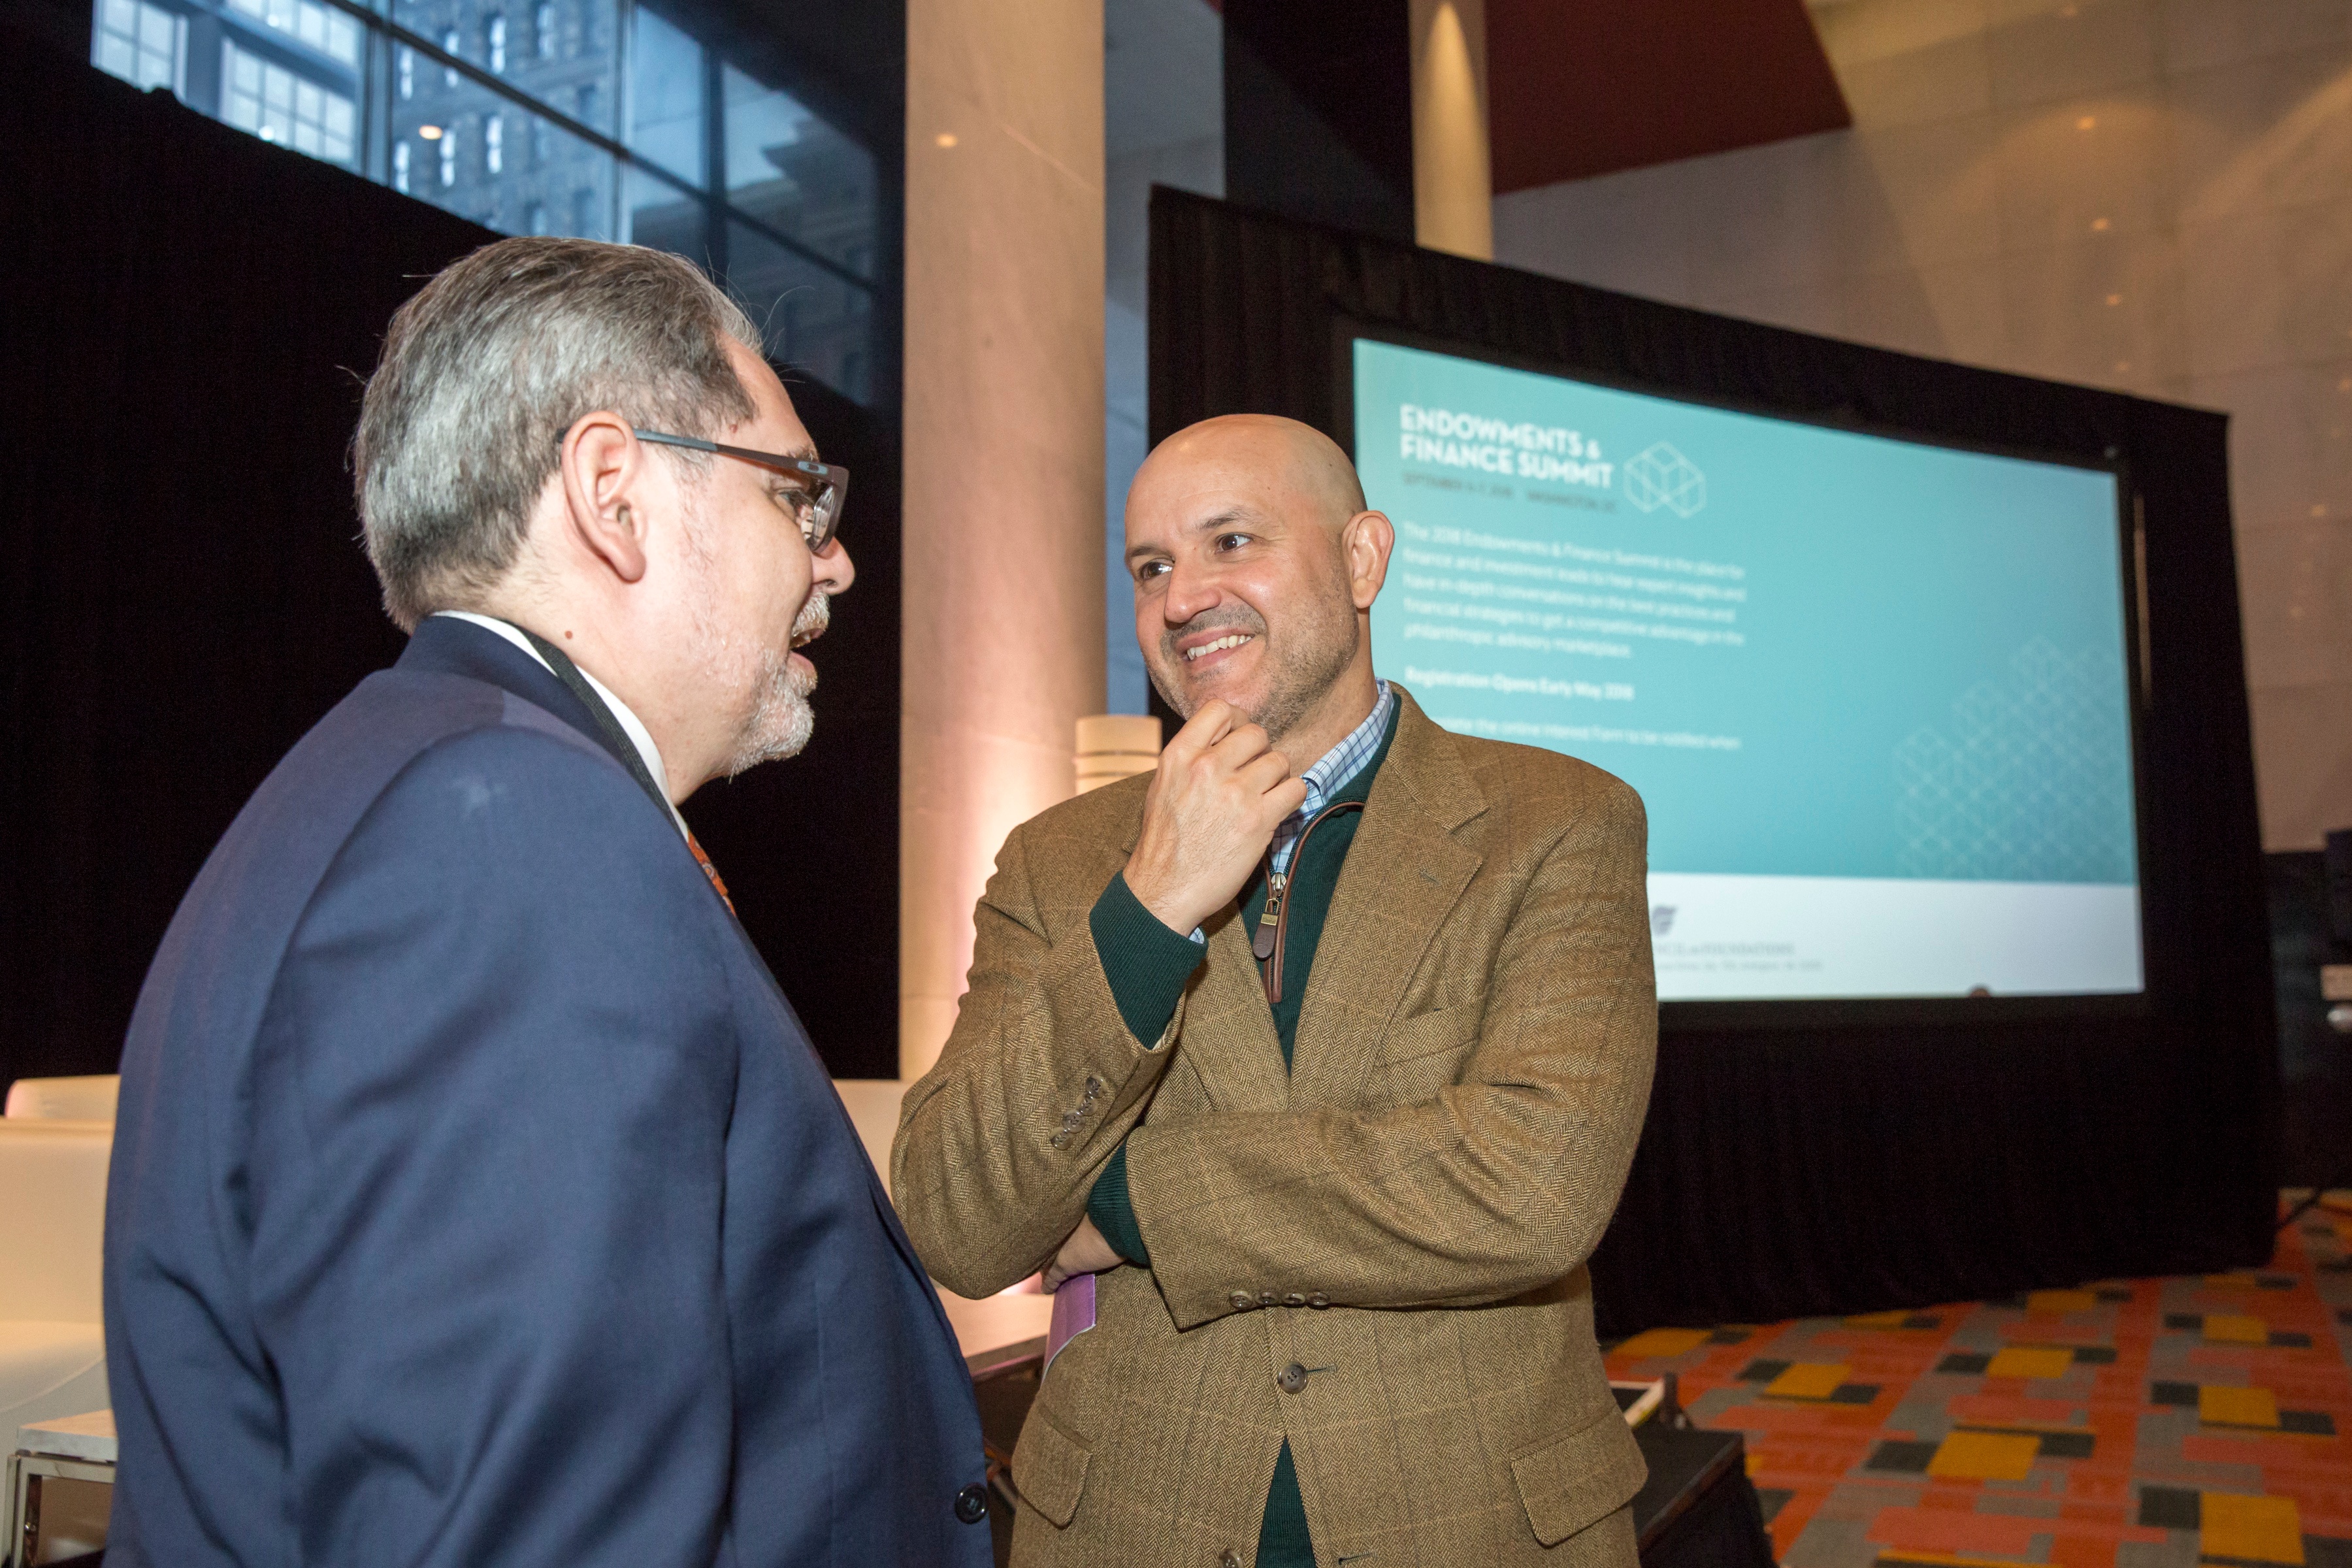 (l-r) <strong>Pedro Ramos</strong>, President and CEO, The Philadelphia Foundation and Council Board Chair <strong>Javier Alberto Soto</strong>, President and CEO, The Miami Foundation